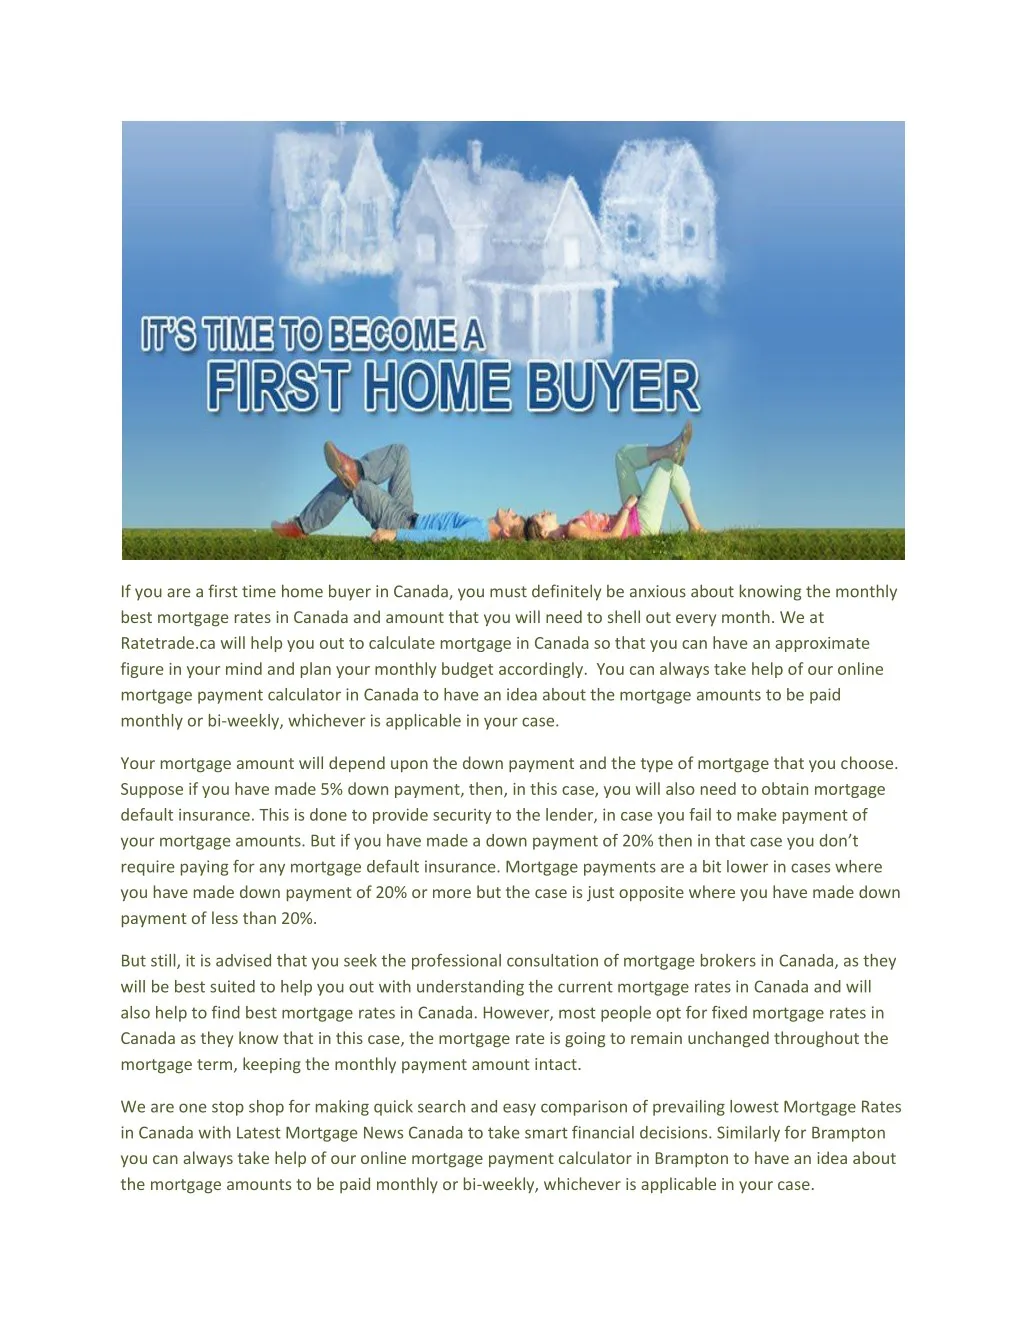 if you are a first time home buyer in canada